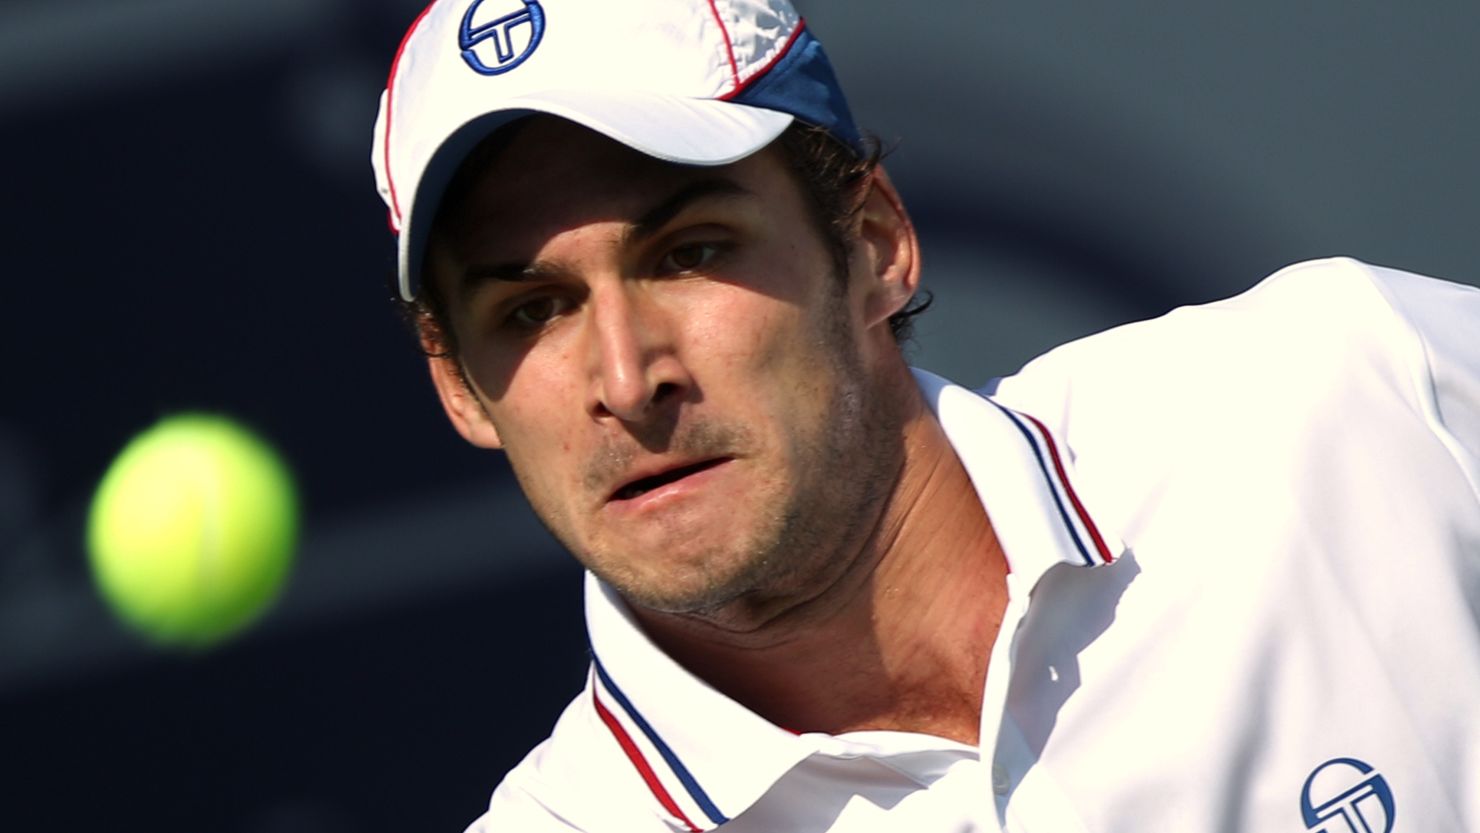 Marko Djokovic, pictured, was watched by brother Novak during his first round defeat in Dubai.